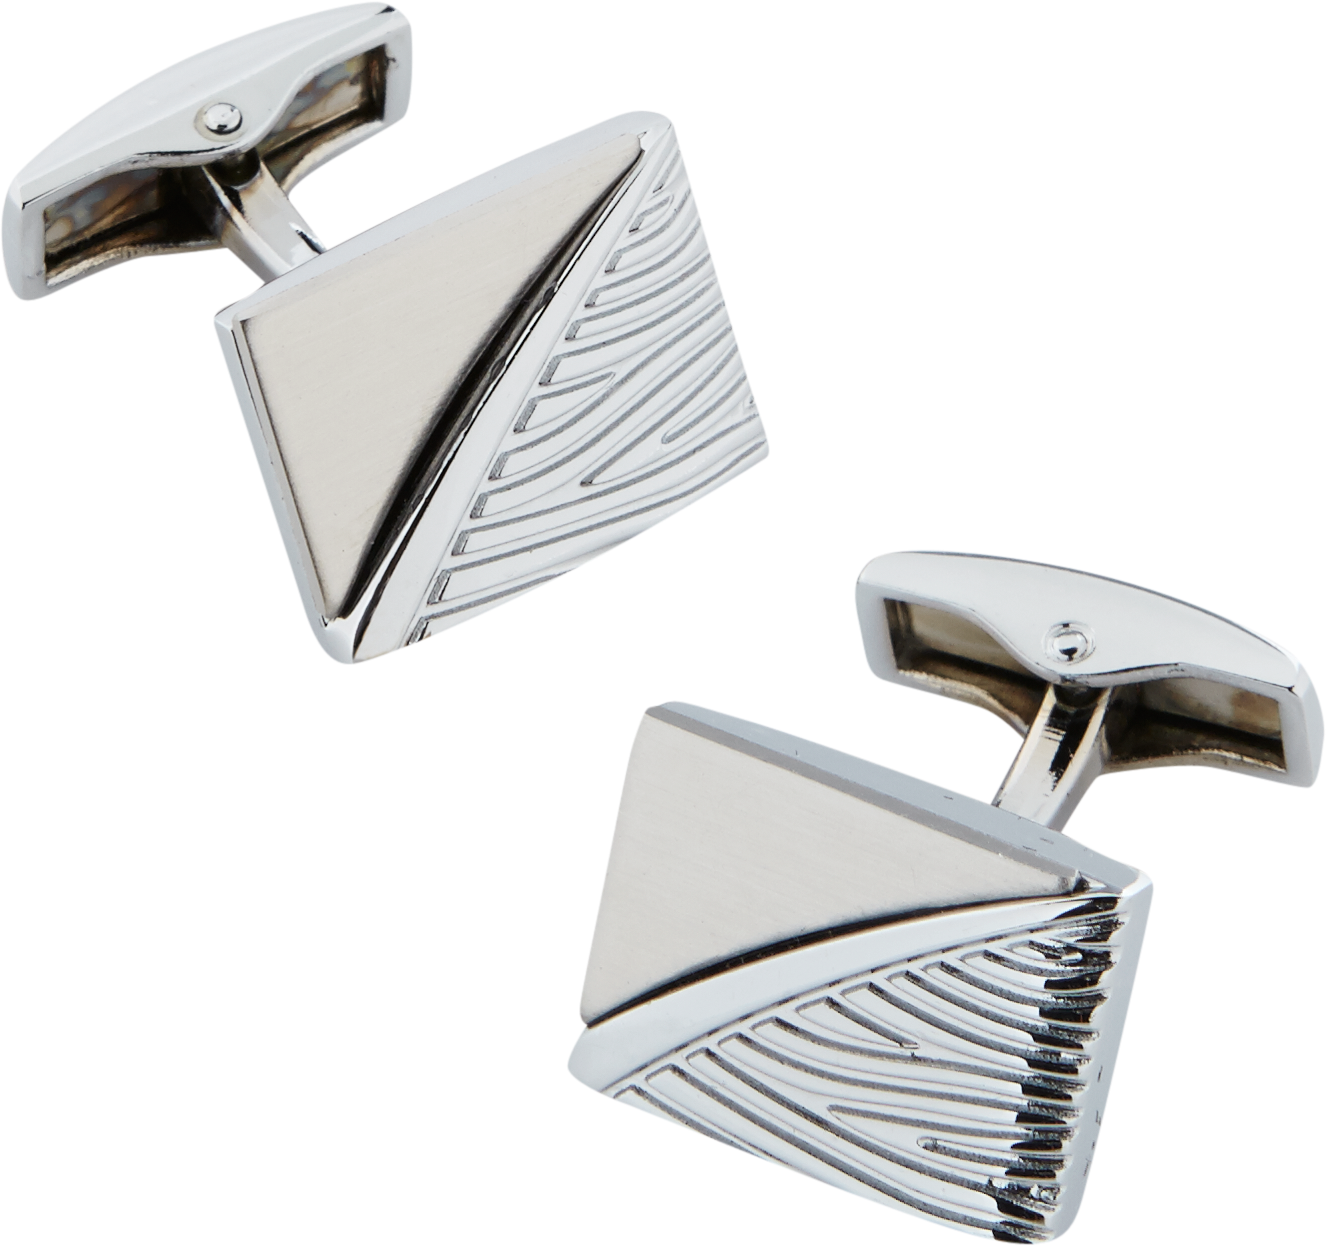 Pronto Uomo Men's Cufflink Stud Set Silver/Black - Size: One Size - Only Available at Men’s Wearhouse